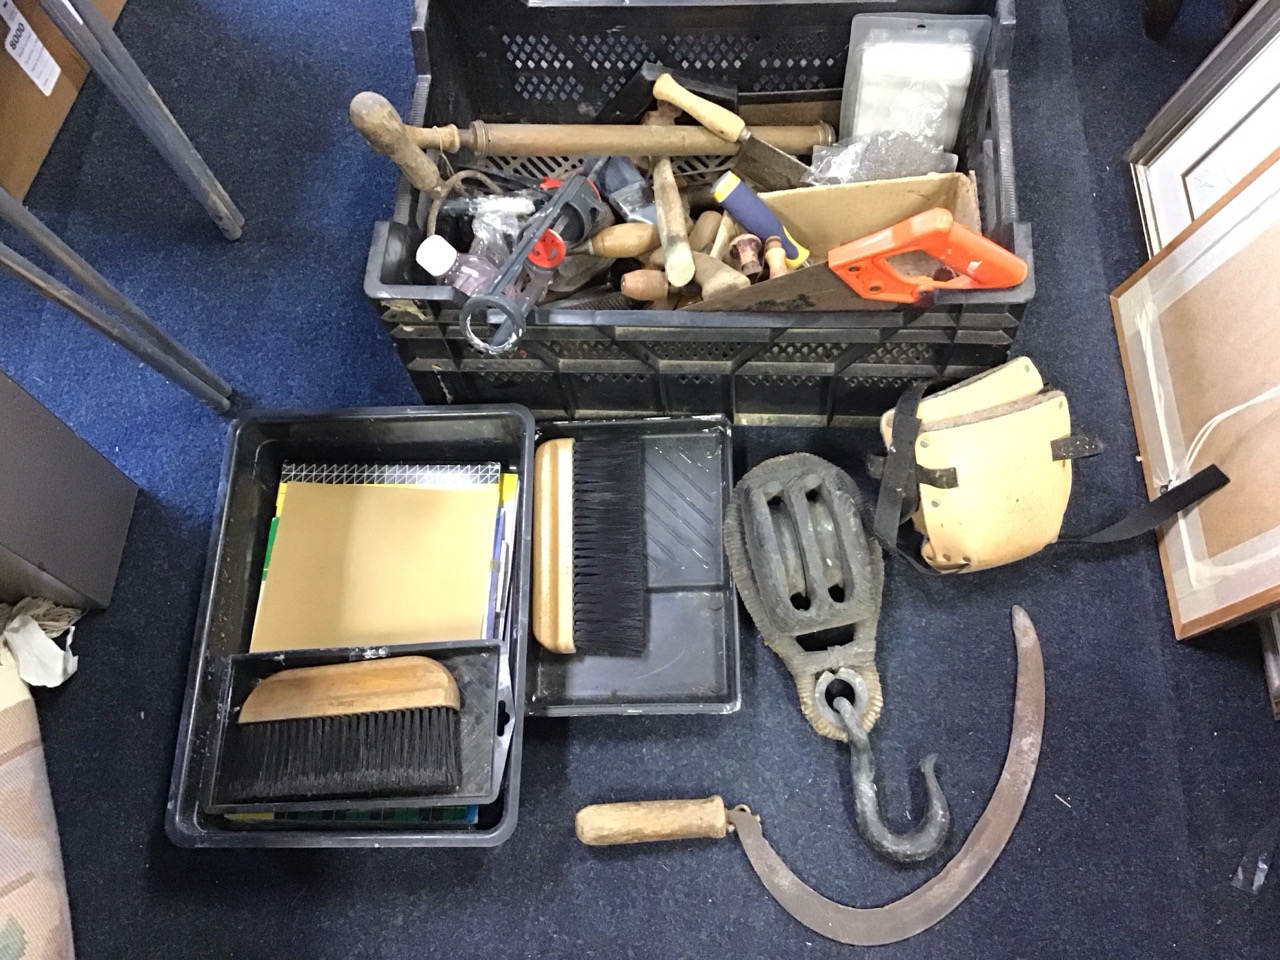 Miscellaneous tools including a double pulley block, a sickle, a drill, a axe, a brass pumped spray,